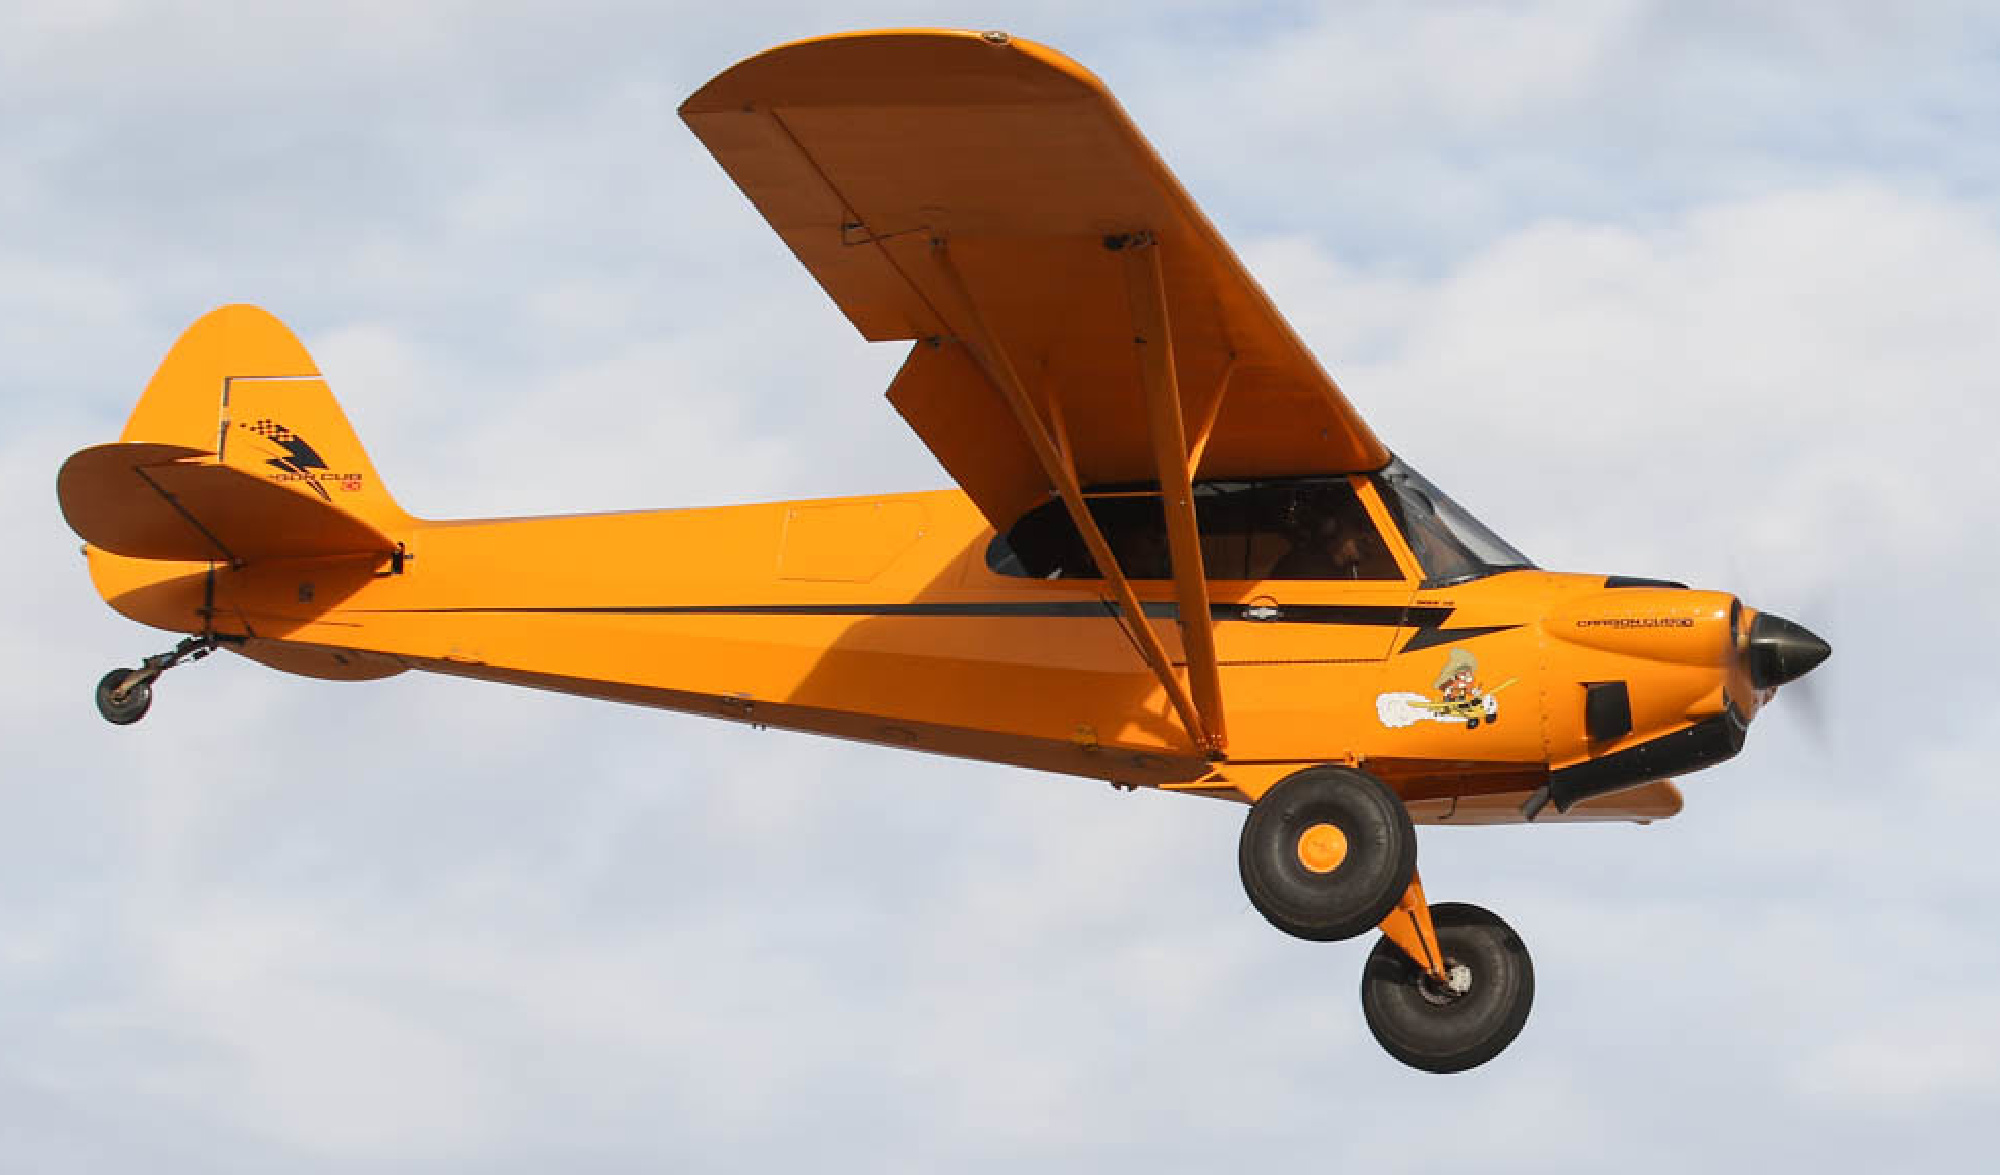 A Carbon Cub plane, the same model that Dustan Currier owned, flies through the sky.